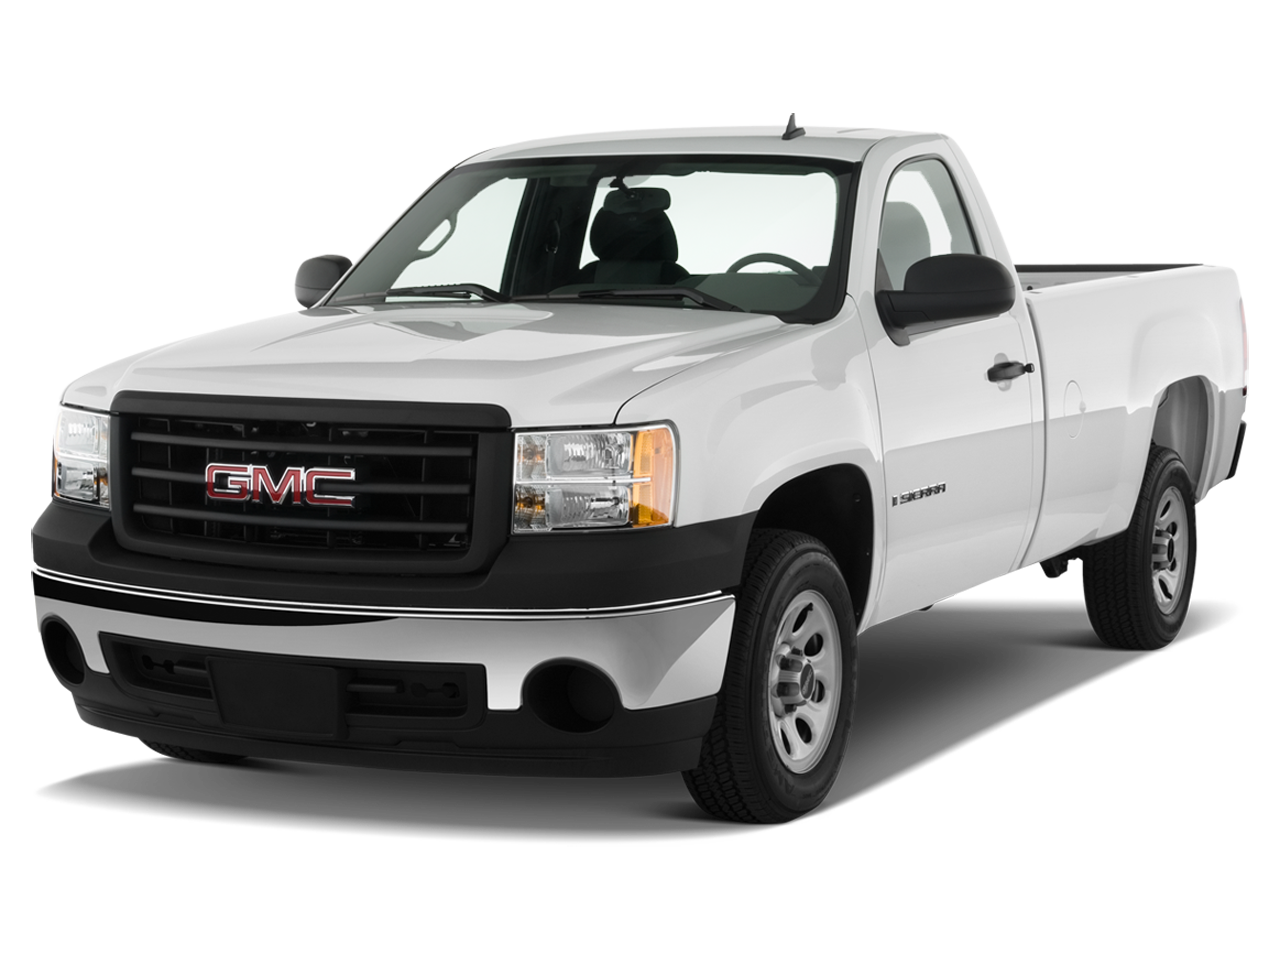 2012 GMC Sierra Prices, Reviews, and Photos - MotorTrend